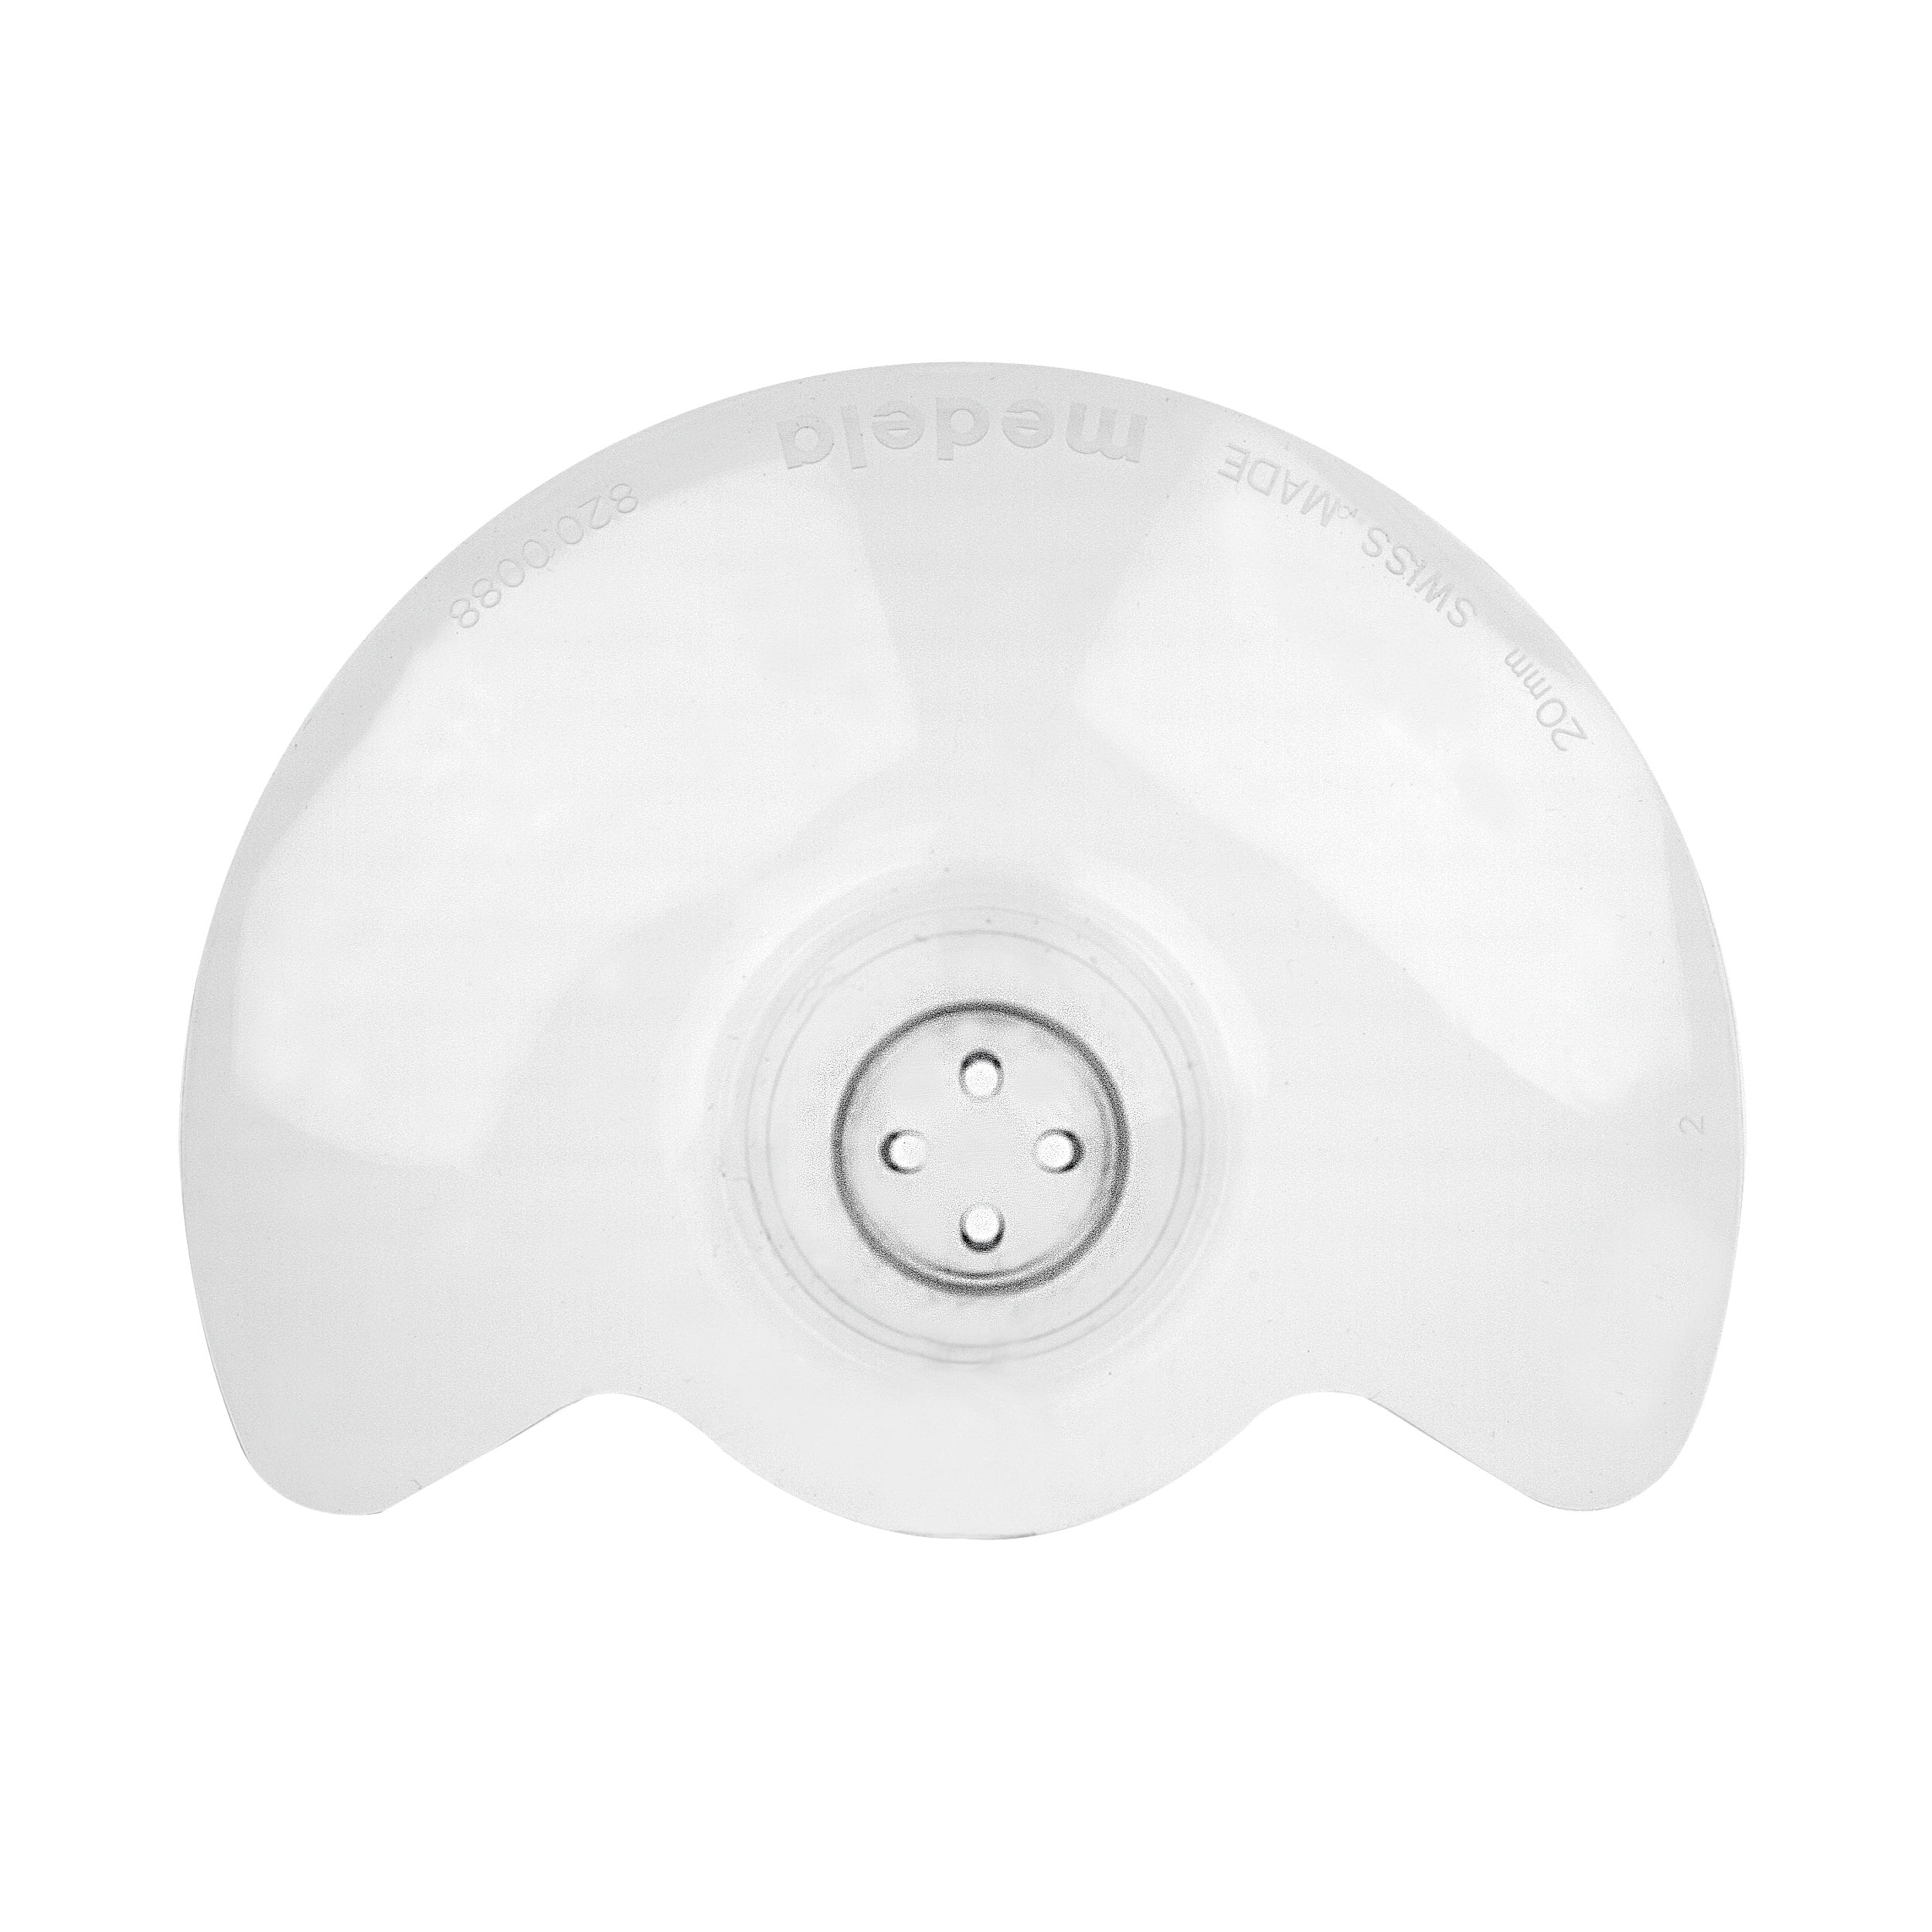 Medela Contact Nipple Shield for Breastfeeding 24mm 2 Count With Carrying  Case for sale online